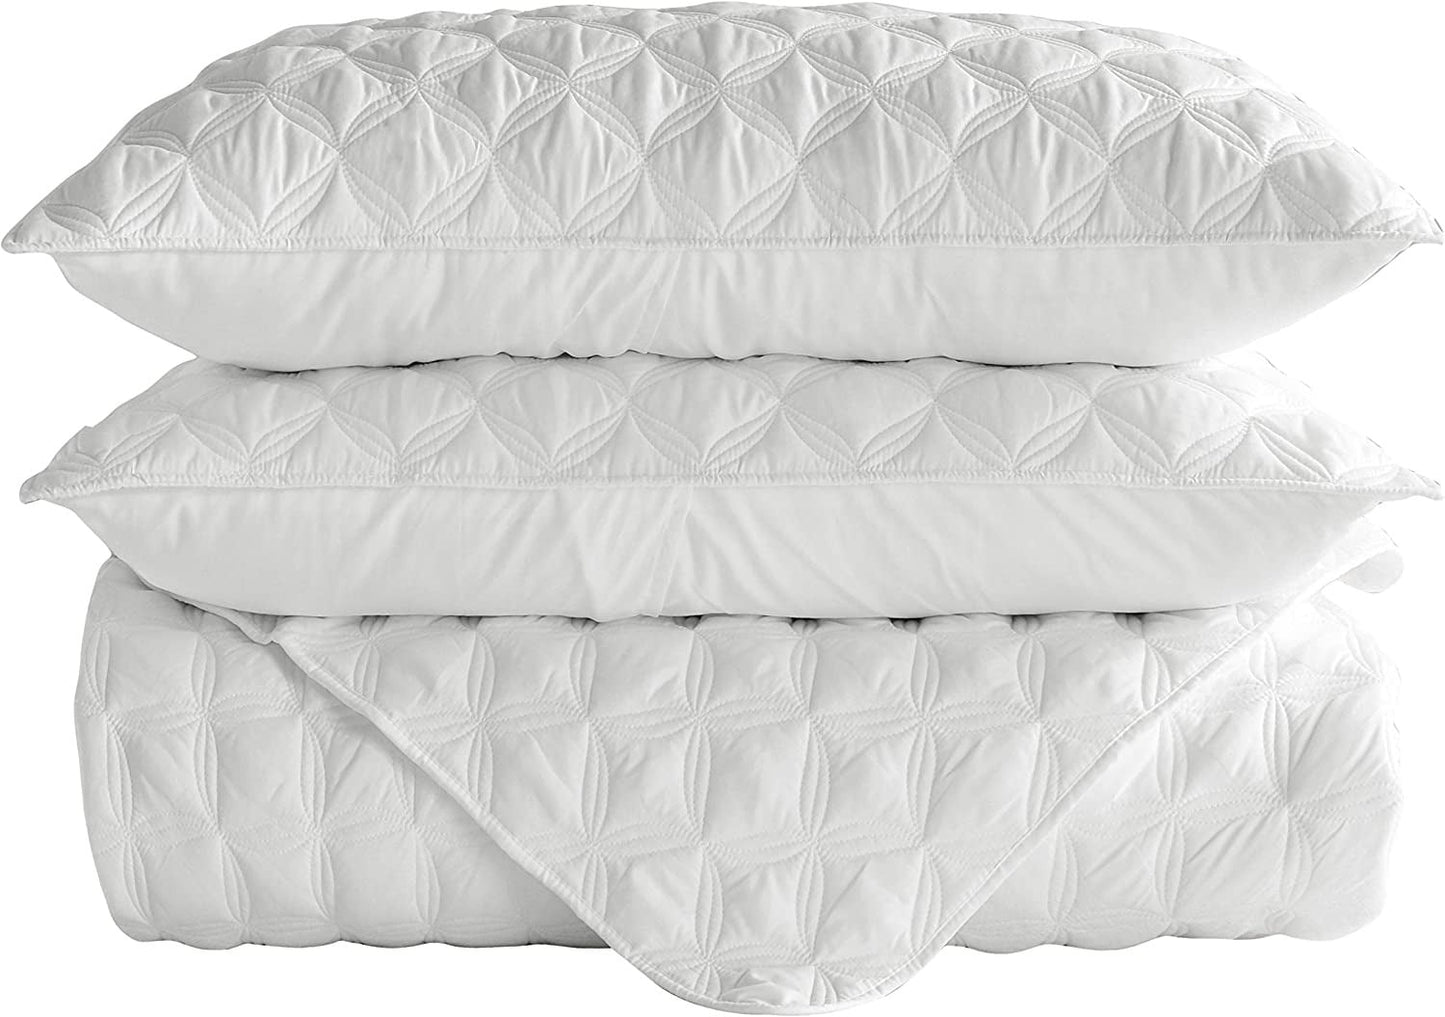 Exclusivo Mezcla Bed Quilt Set King Size for All Season, Stitched Pattern Quilted Bedspread/ Bedding Set/ Coverlet with 2 Pillow shams, Lightweight and Soft, White